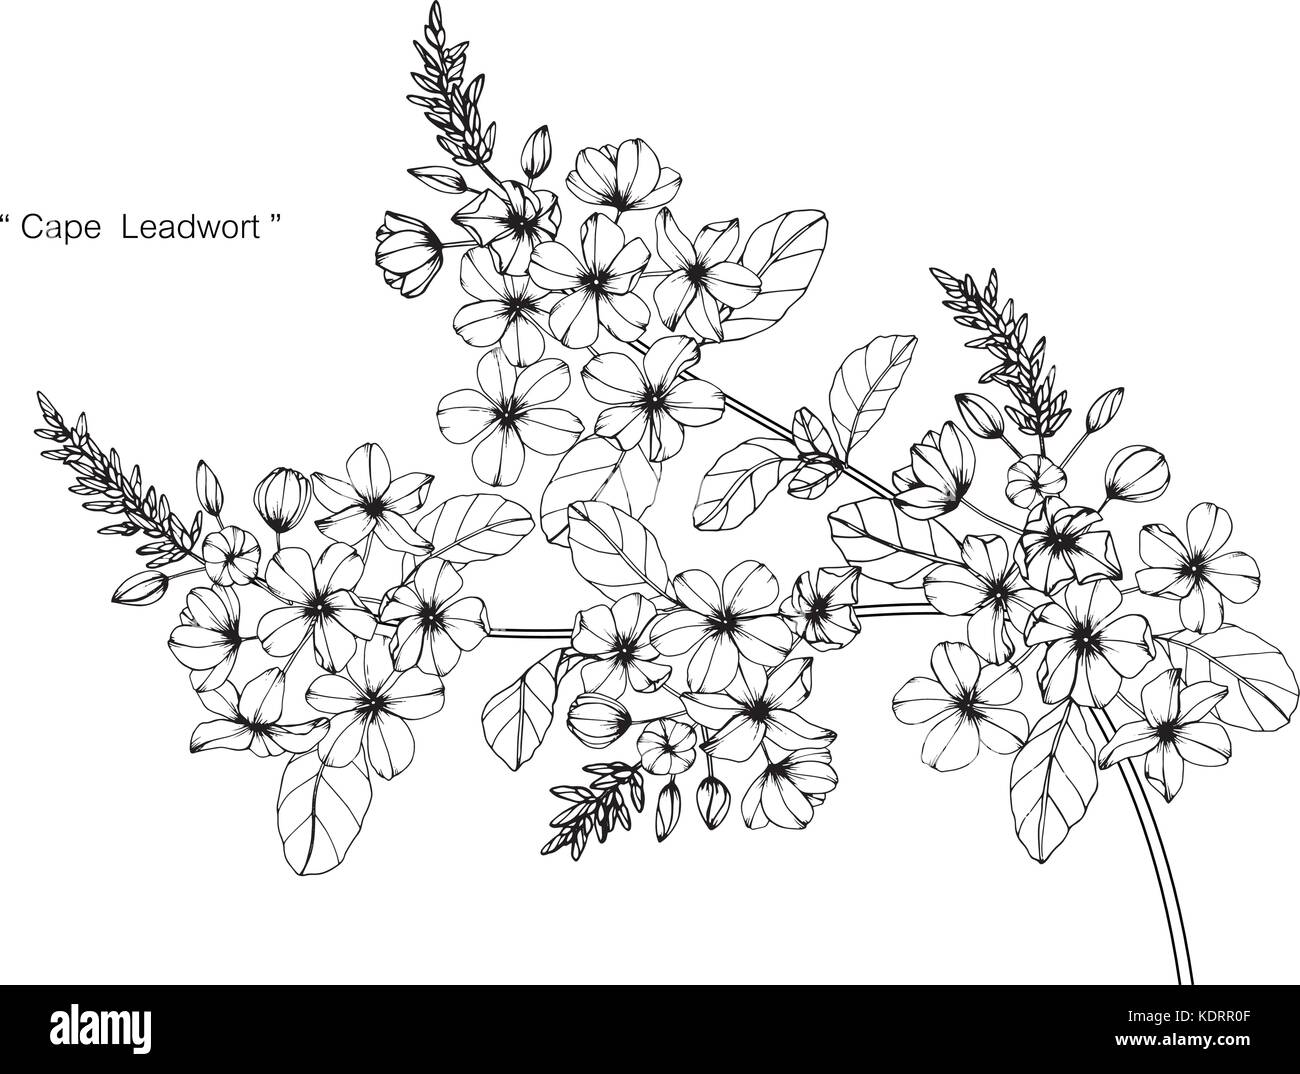 Cape leadwort flower drawing  illustration. Black and white with line art. Stock Vector